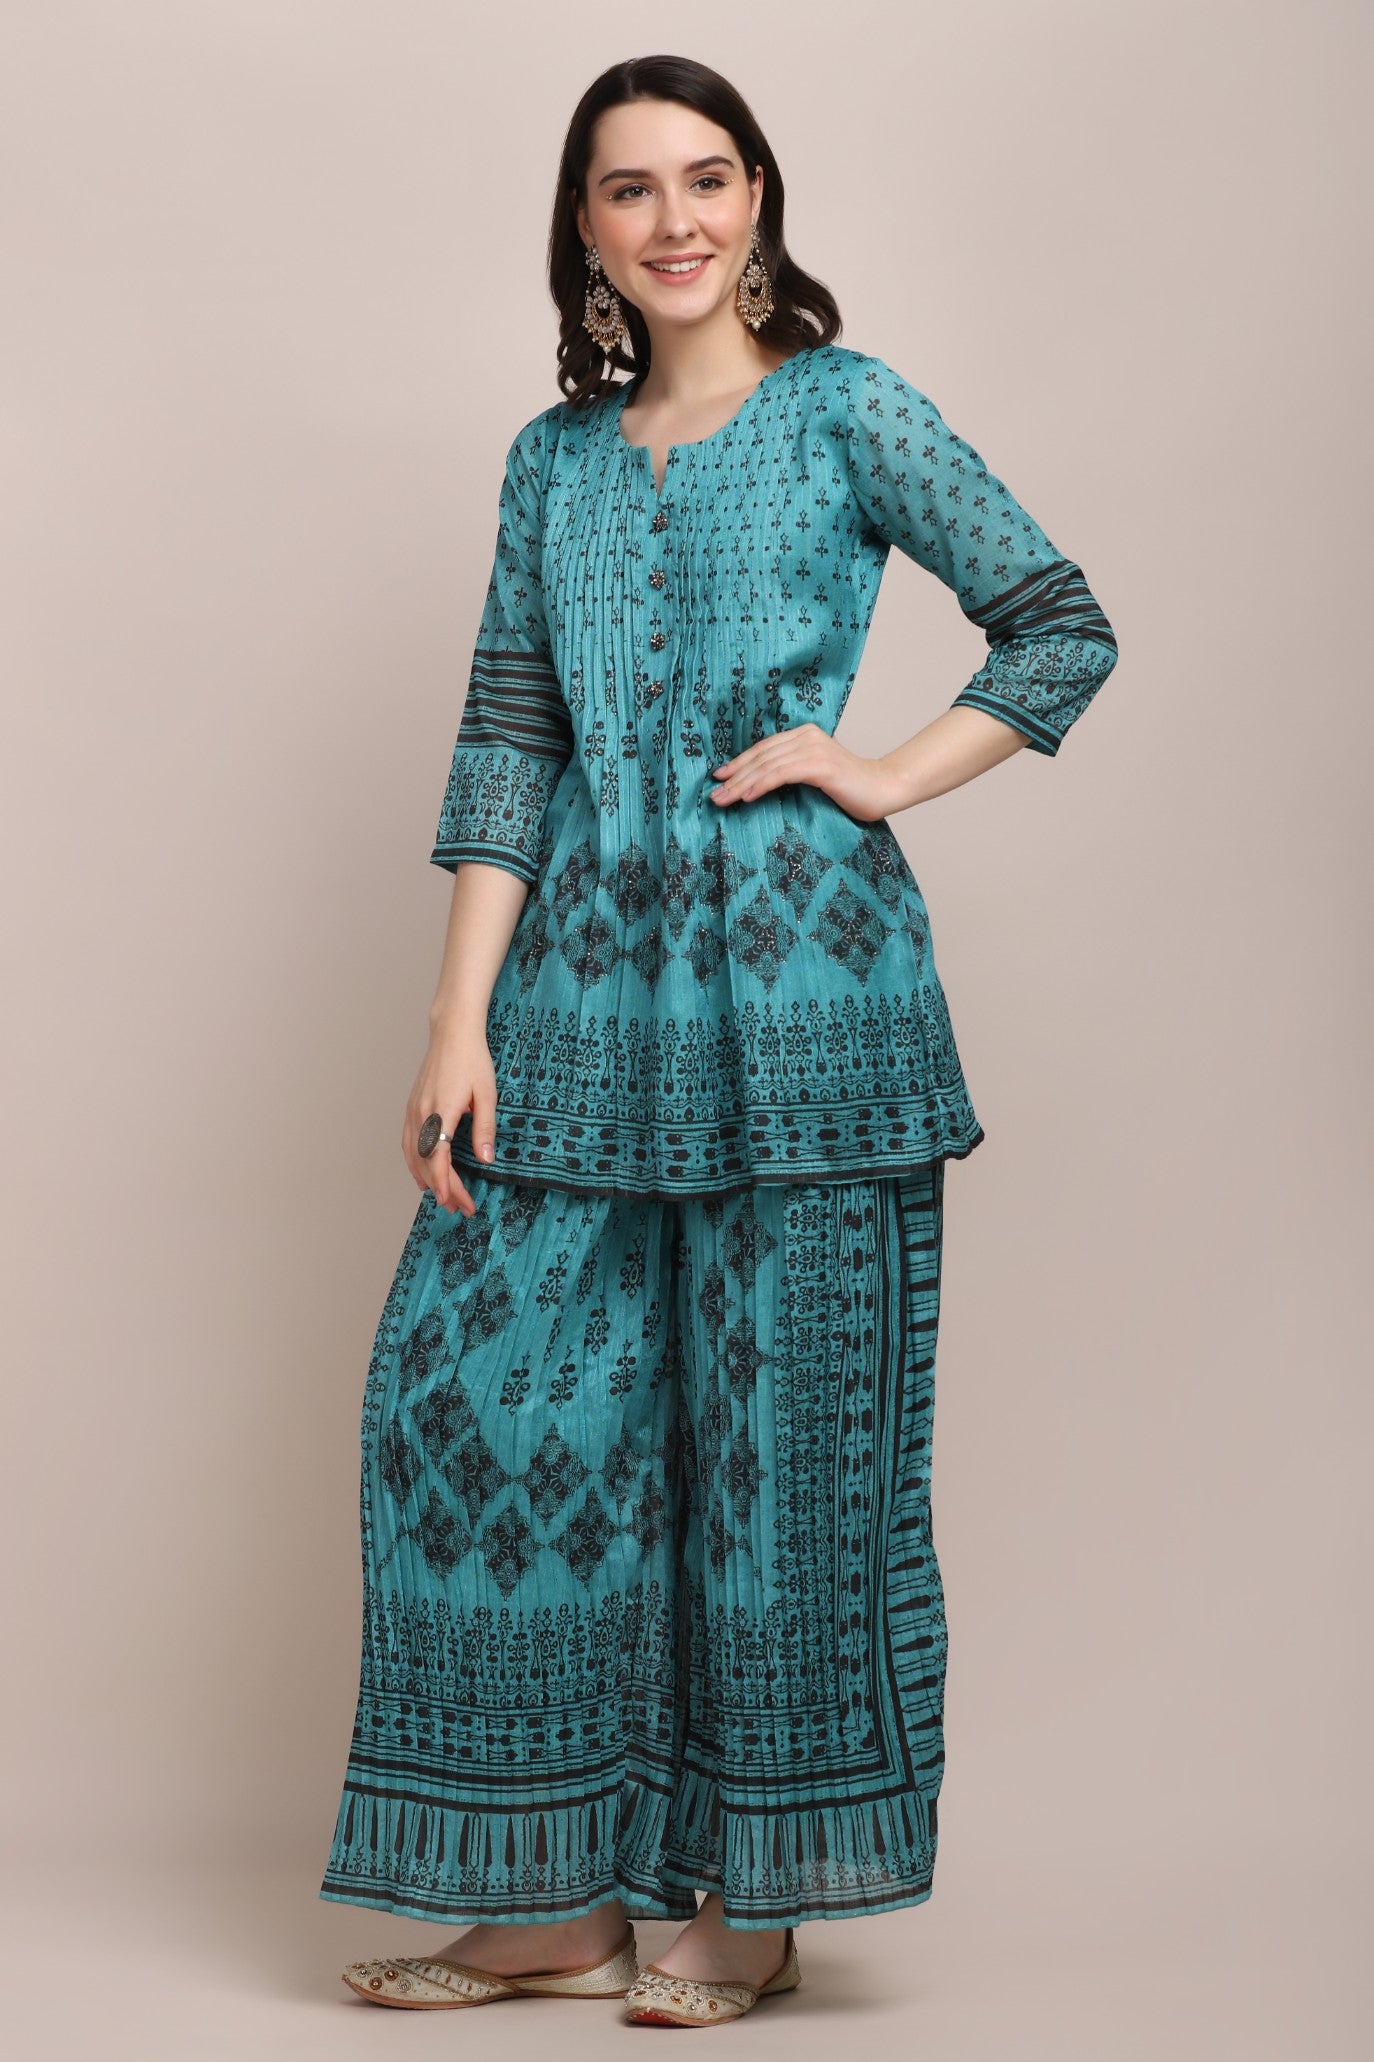 Classy Bottle Green Color Floral Motif Printed Palazzo Set